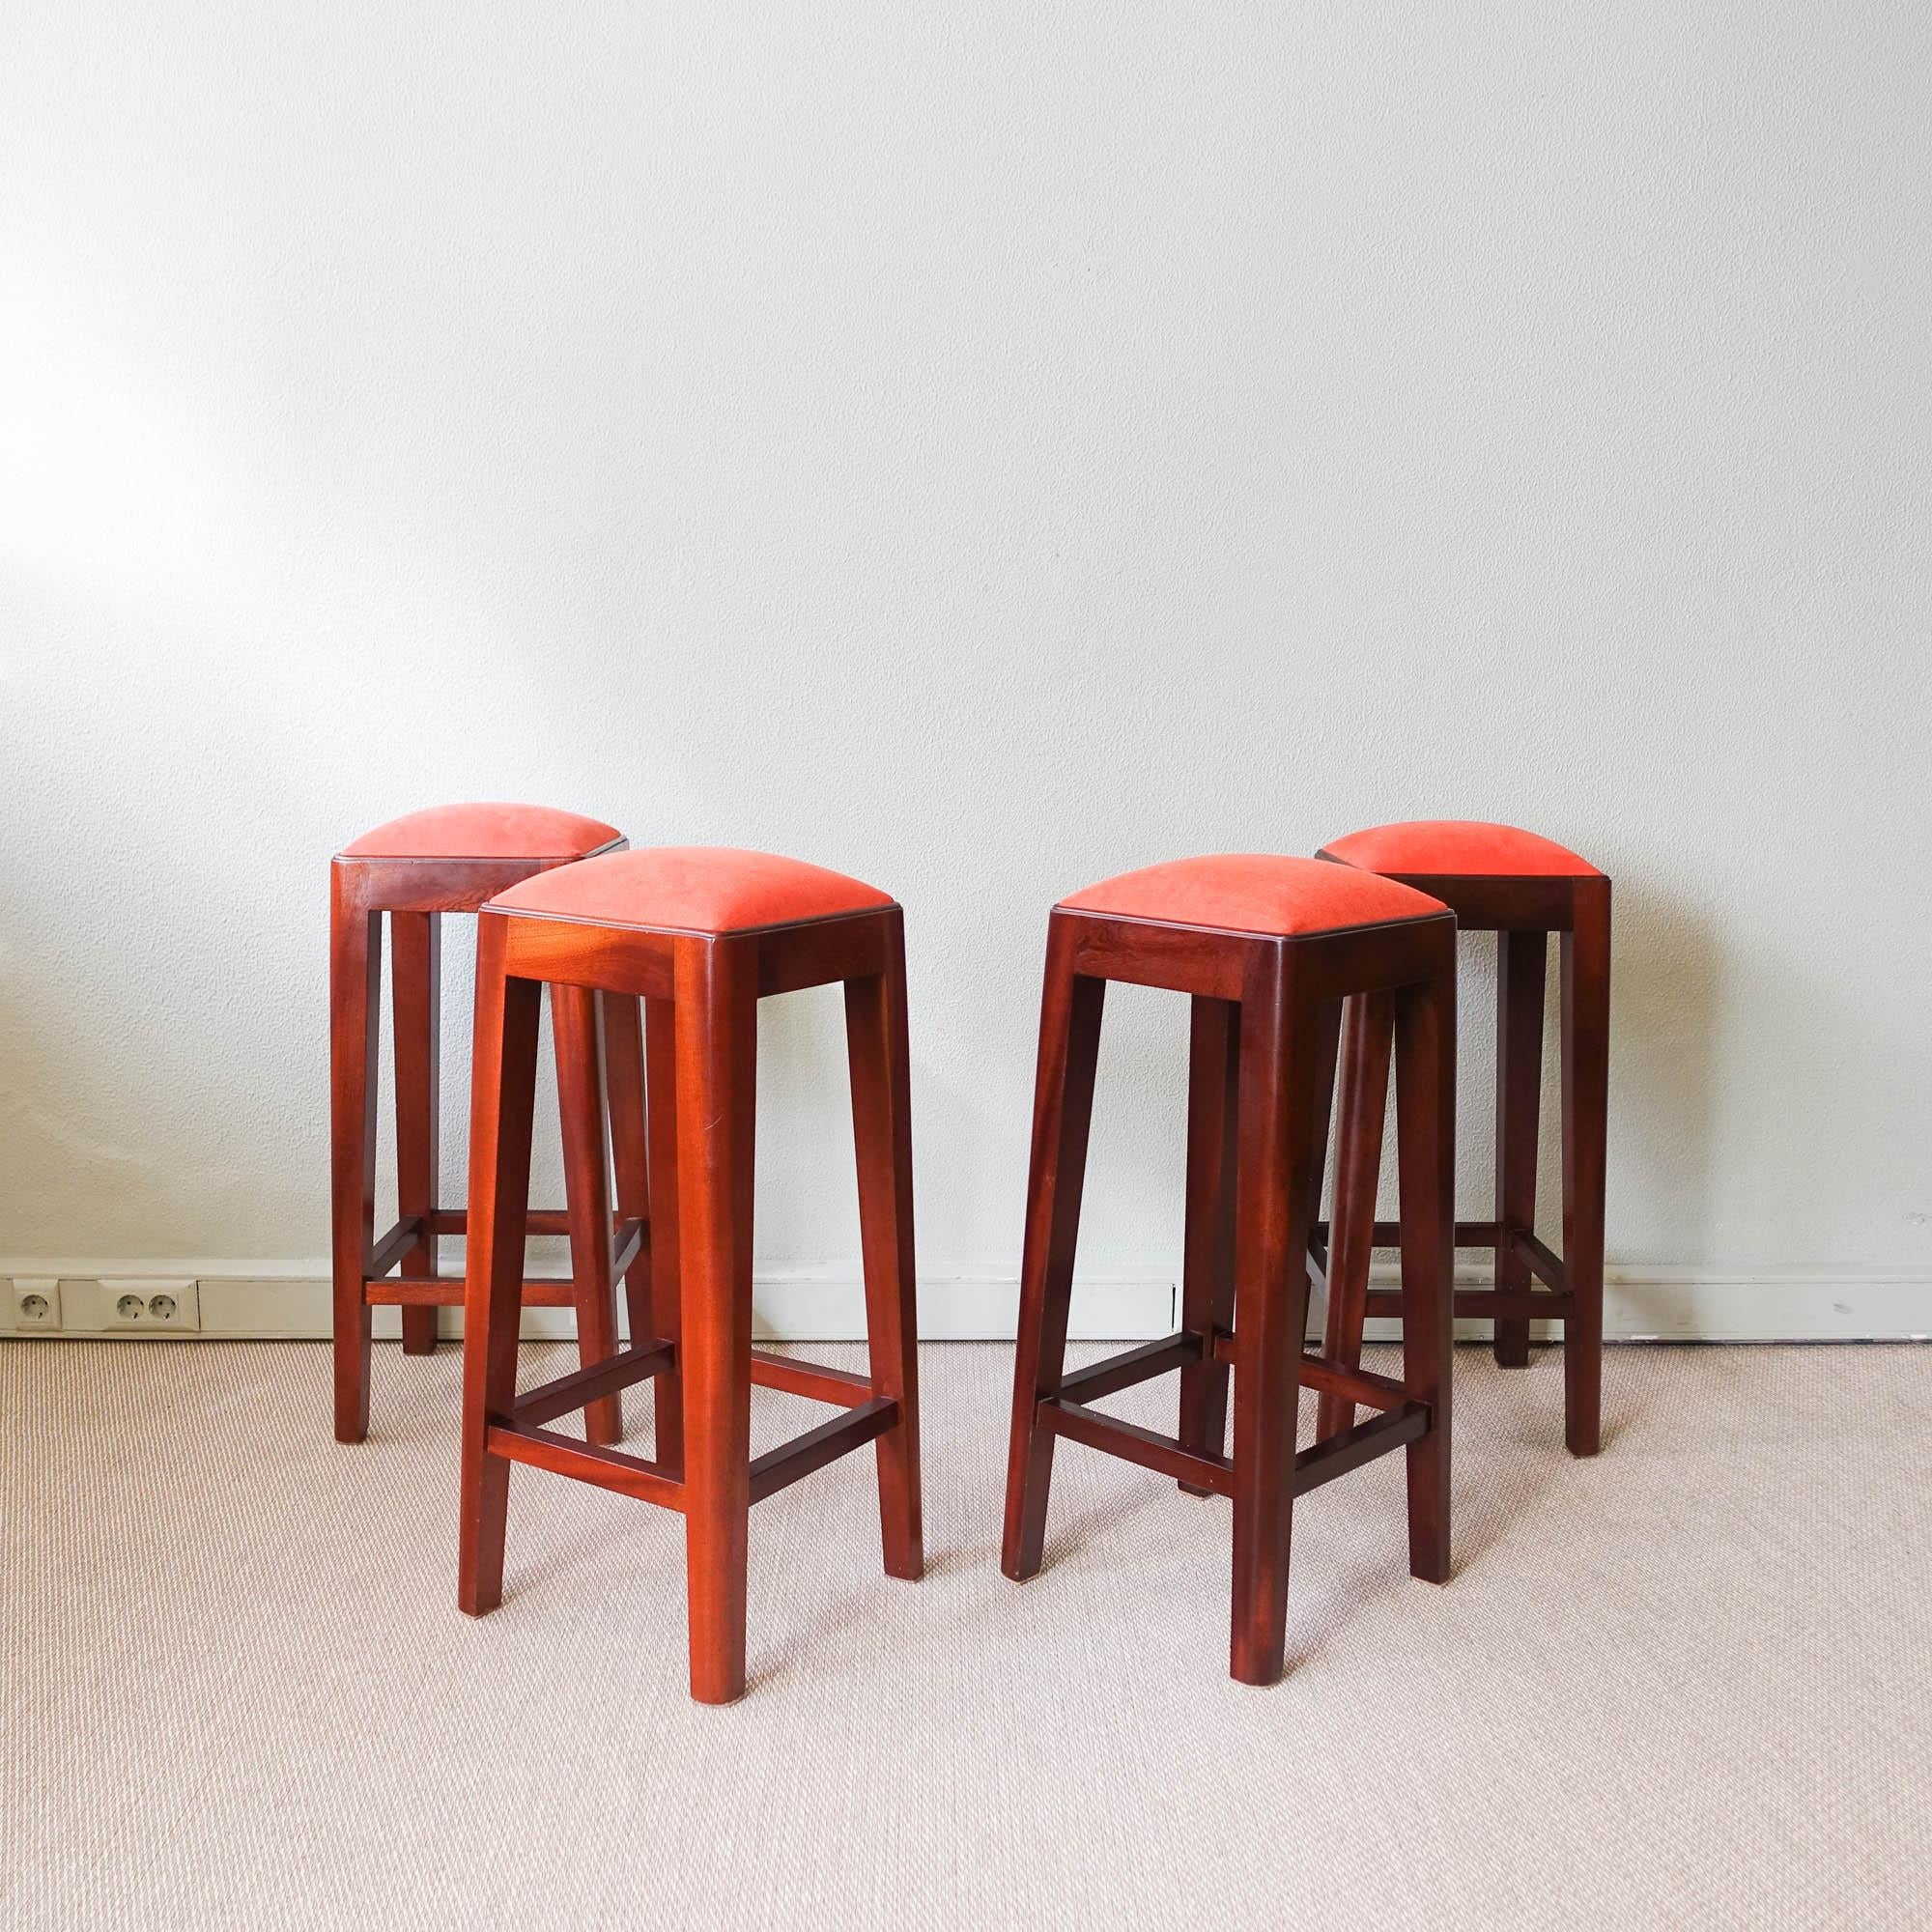 Pair of Vintage Portuguese High Stools, 1960's For Sale 7